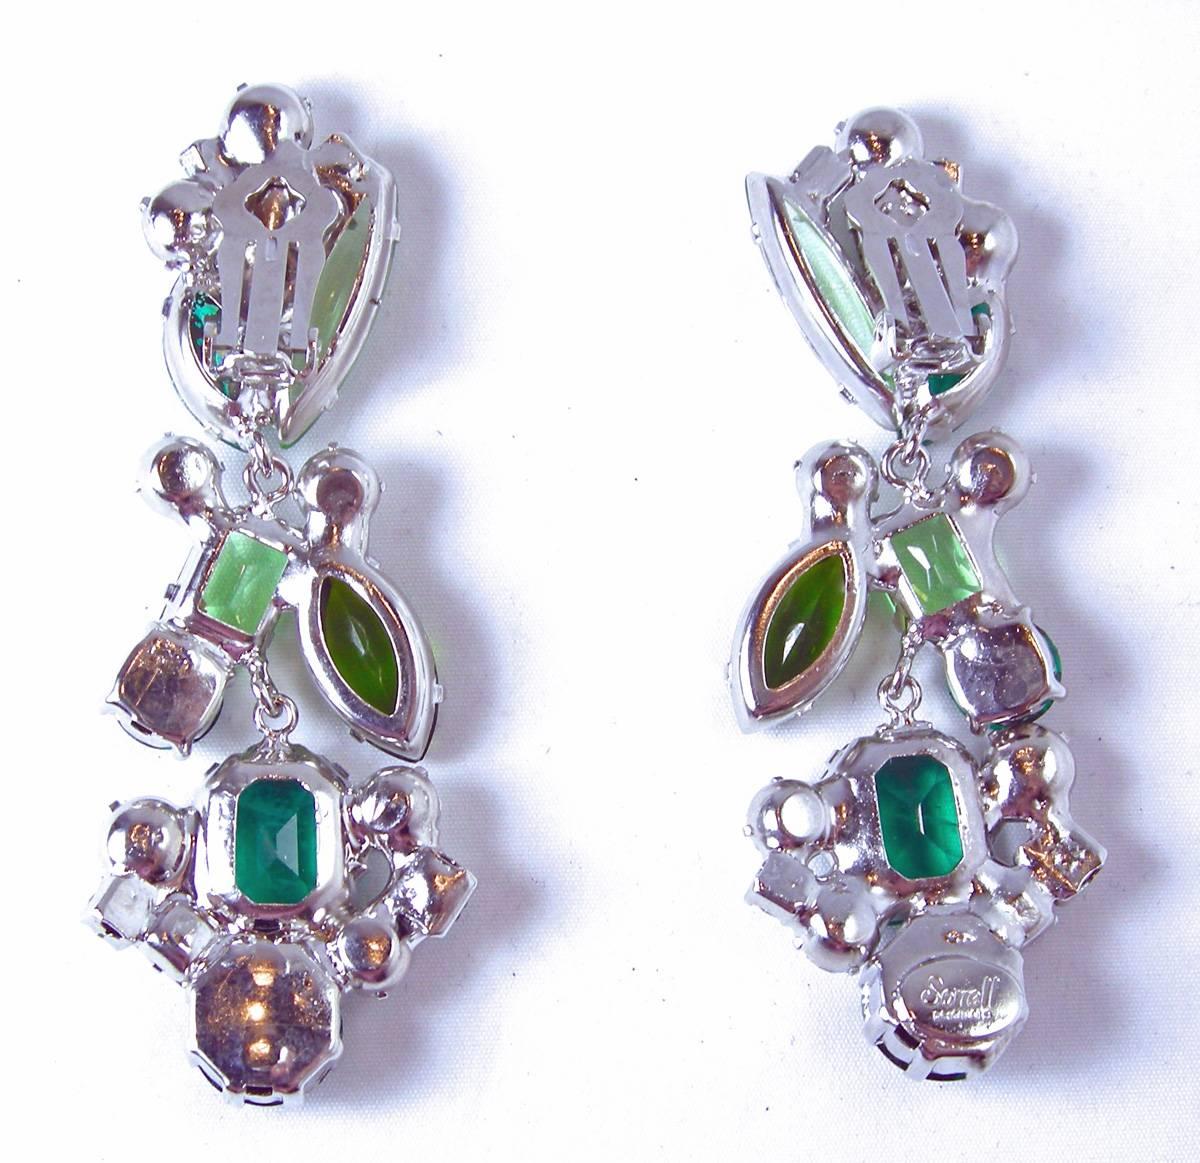 These gorgeous one-of-a-kind earrings by Robert Sorrell feature hues of green and clear faceted crystals in a silver-tone setting. These clip earrings measure 3” x 1” and are signed “Sorrell Originals”.  These earrings are in excellent condition.